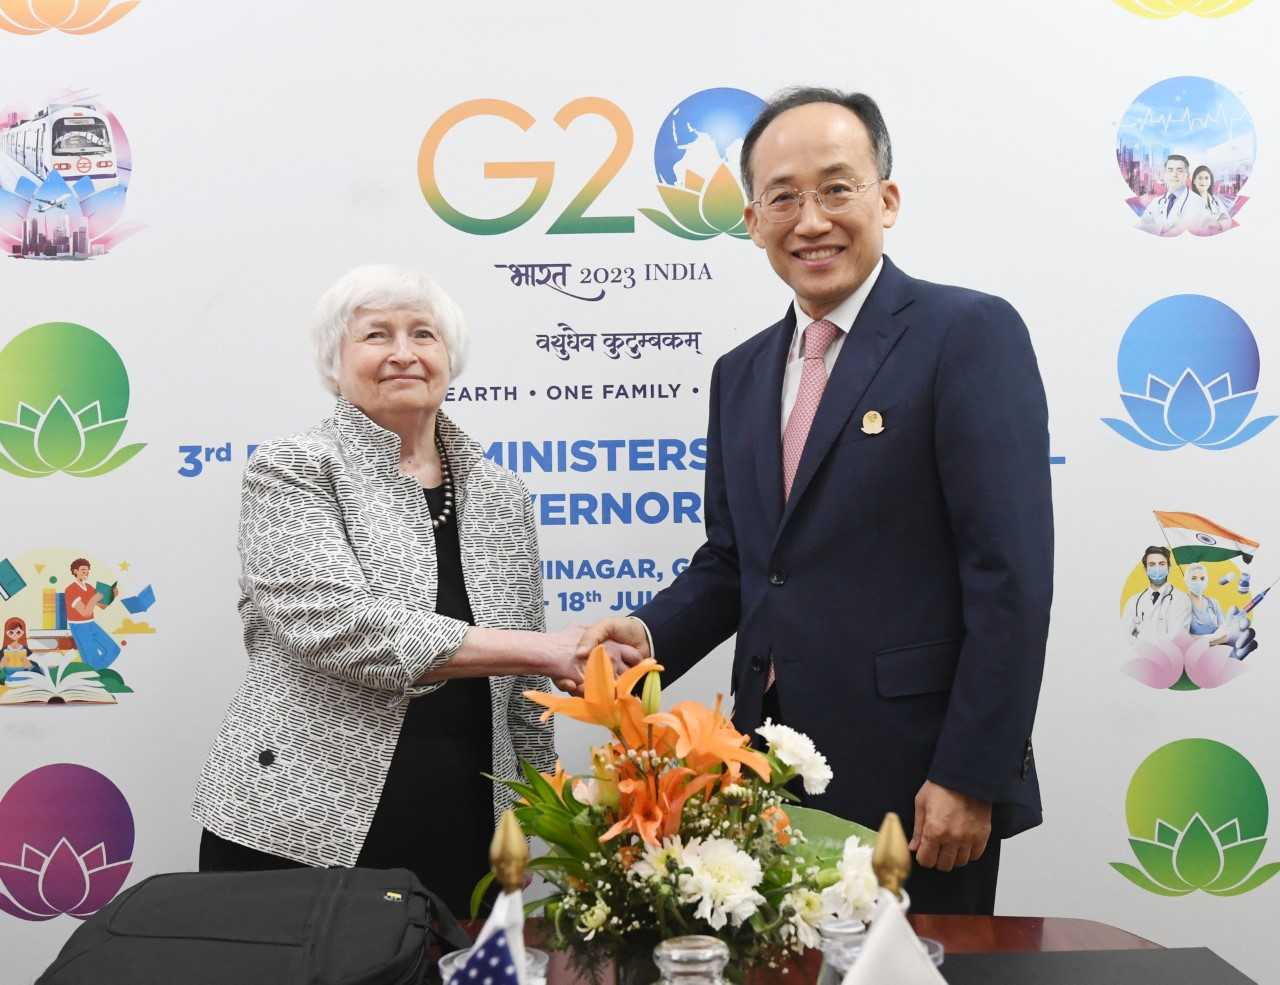 Finance Minister Choo Kyung-ho (right) shakes hands with US Treasury Secretary Janet Yellen before holding talks at the G-20 Finance Ministers and Central Bank Governors Meeting at the Mahatma Mandir Convention & Exhibition Center in Gandhinagar, India on Monday. (Finance Ministry)